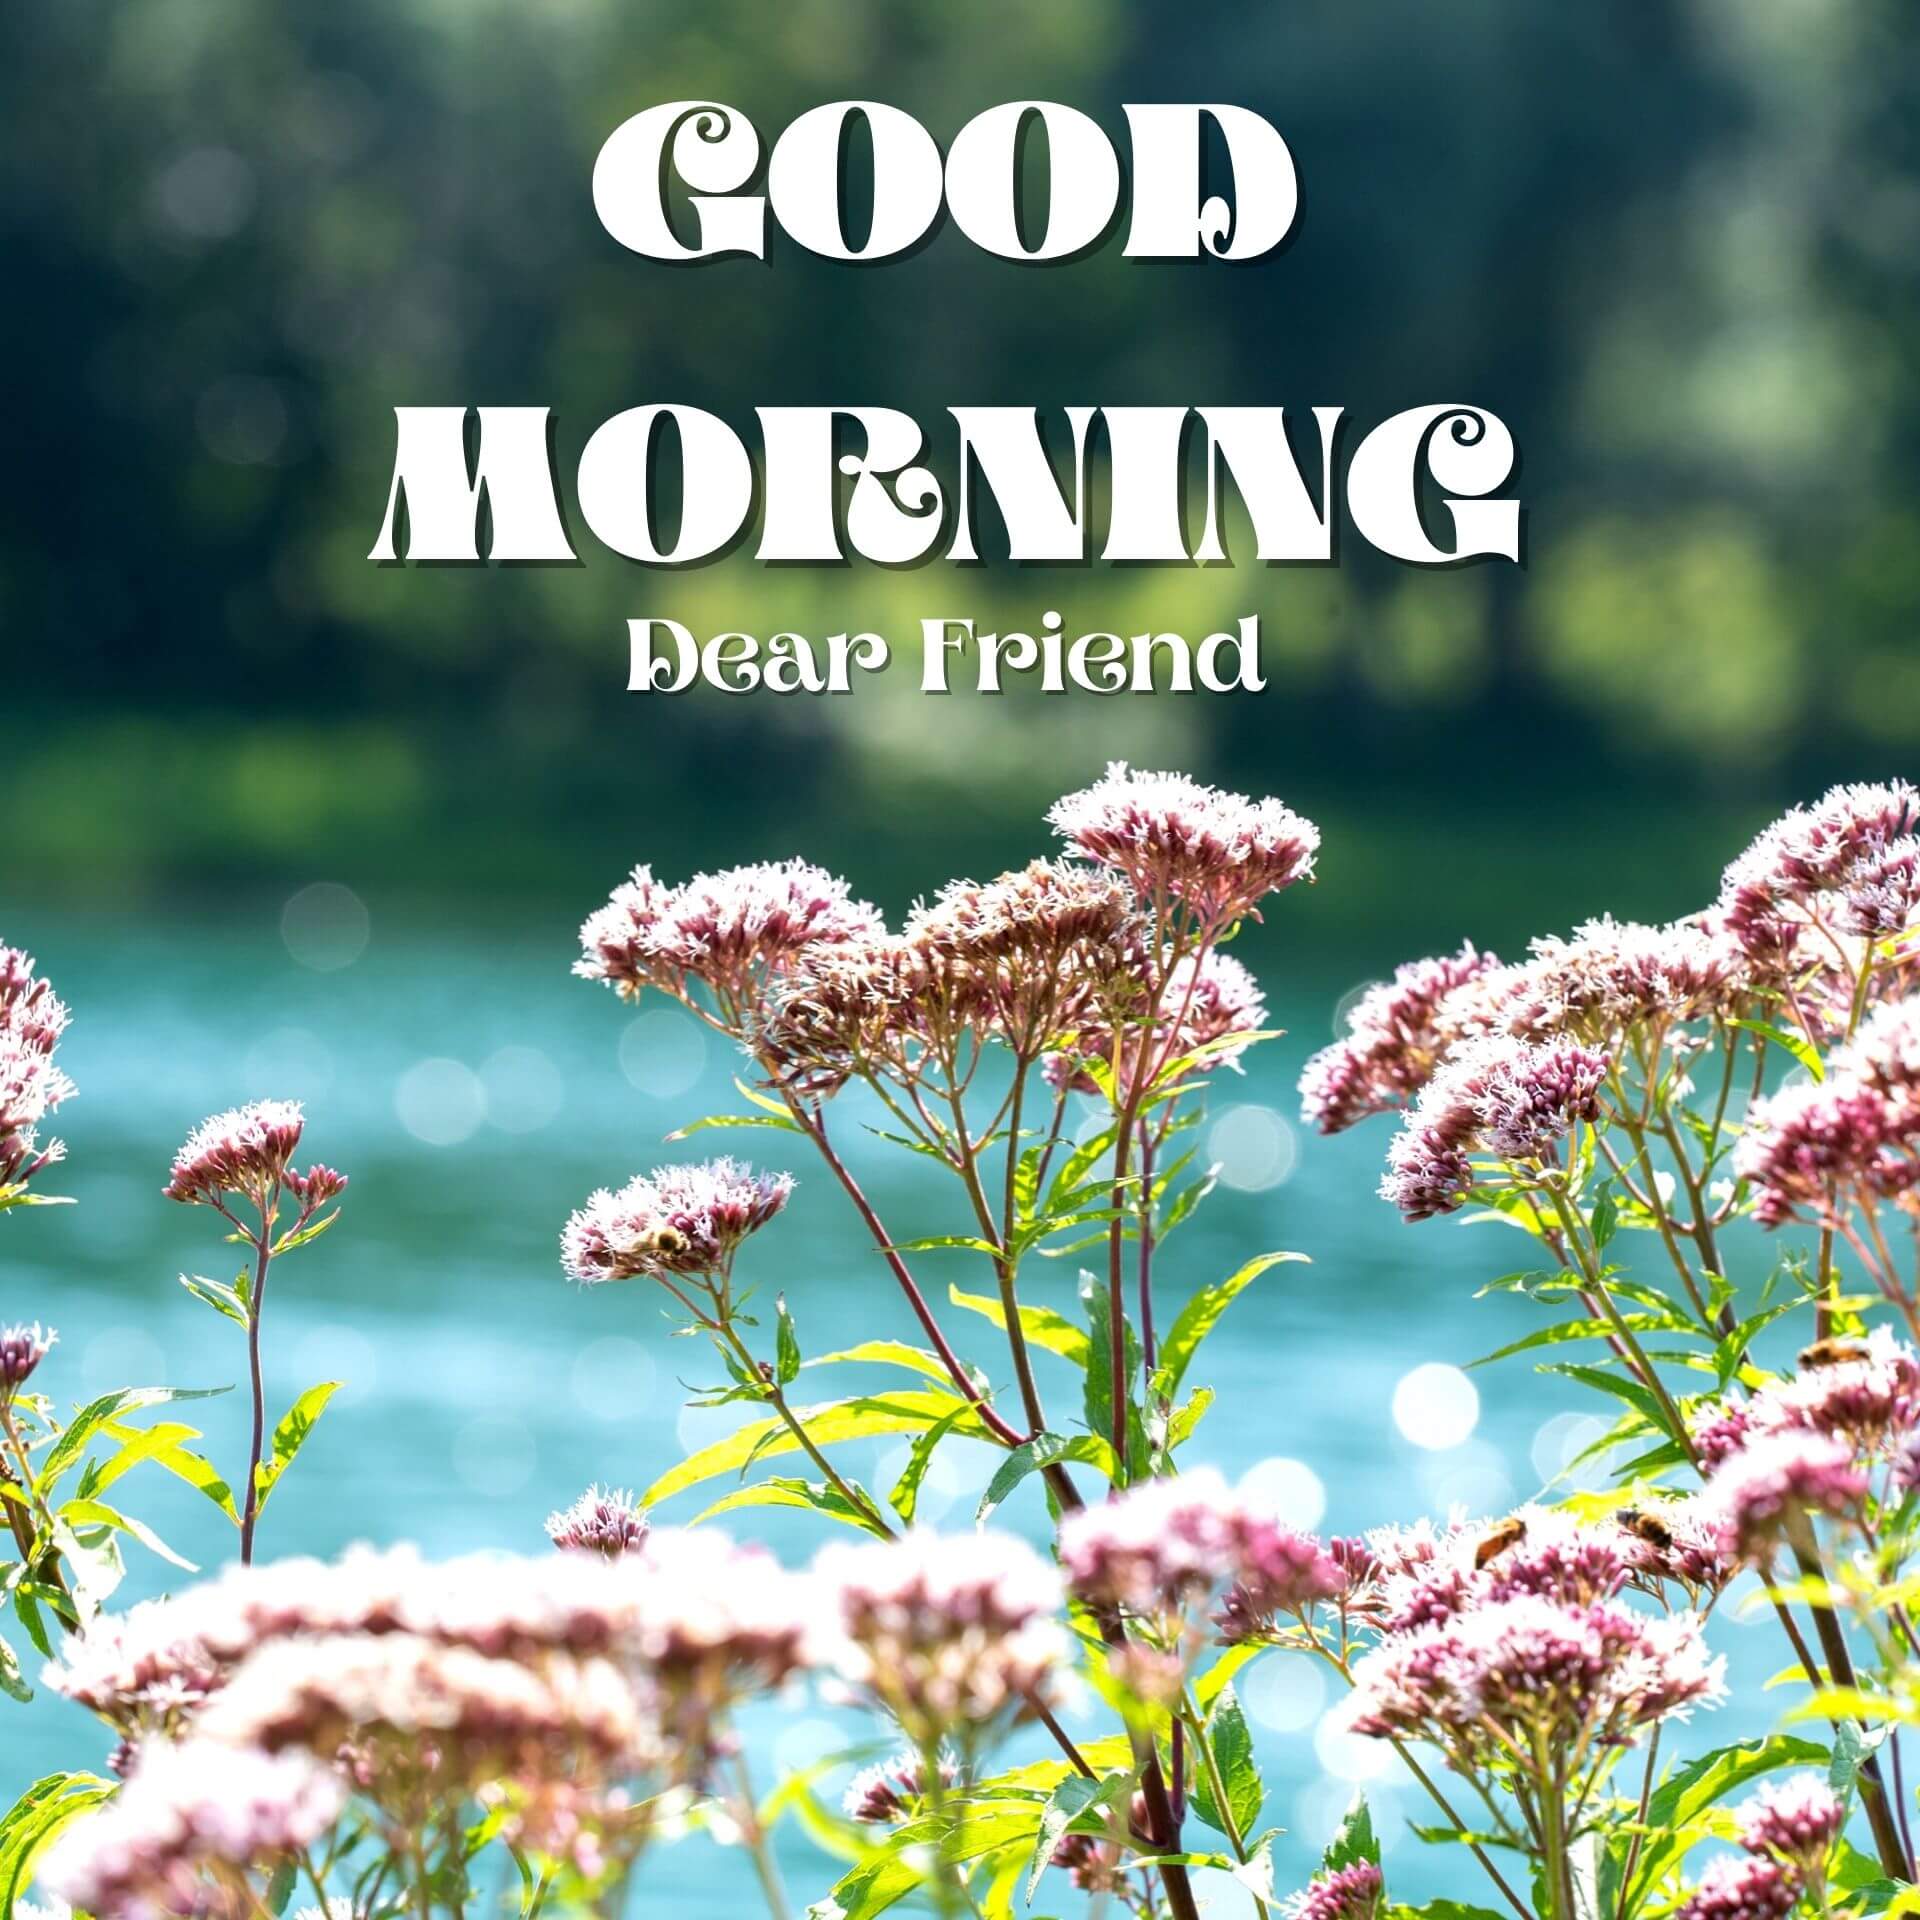 Good Morning Images HD 1080p Download 2023 Free